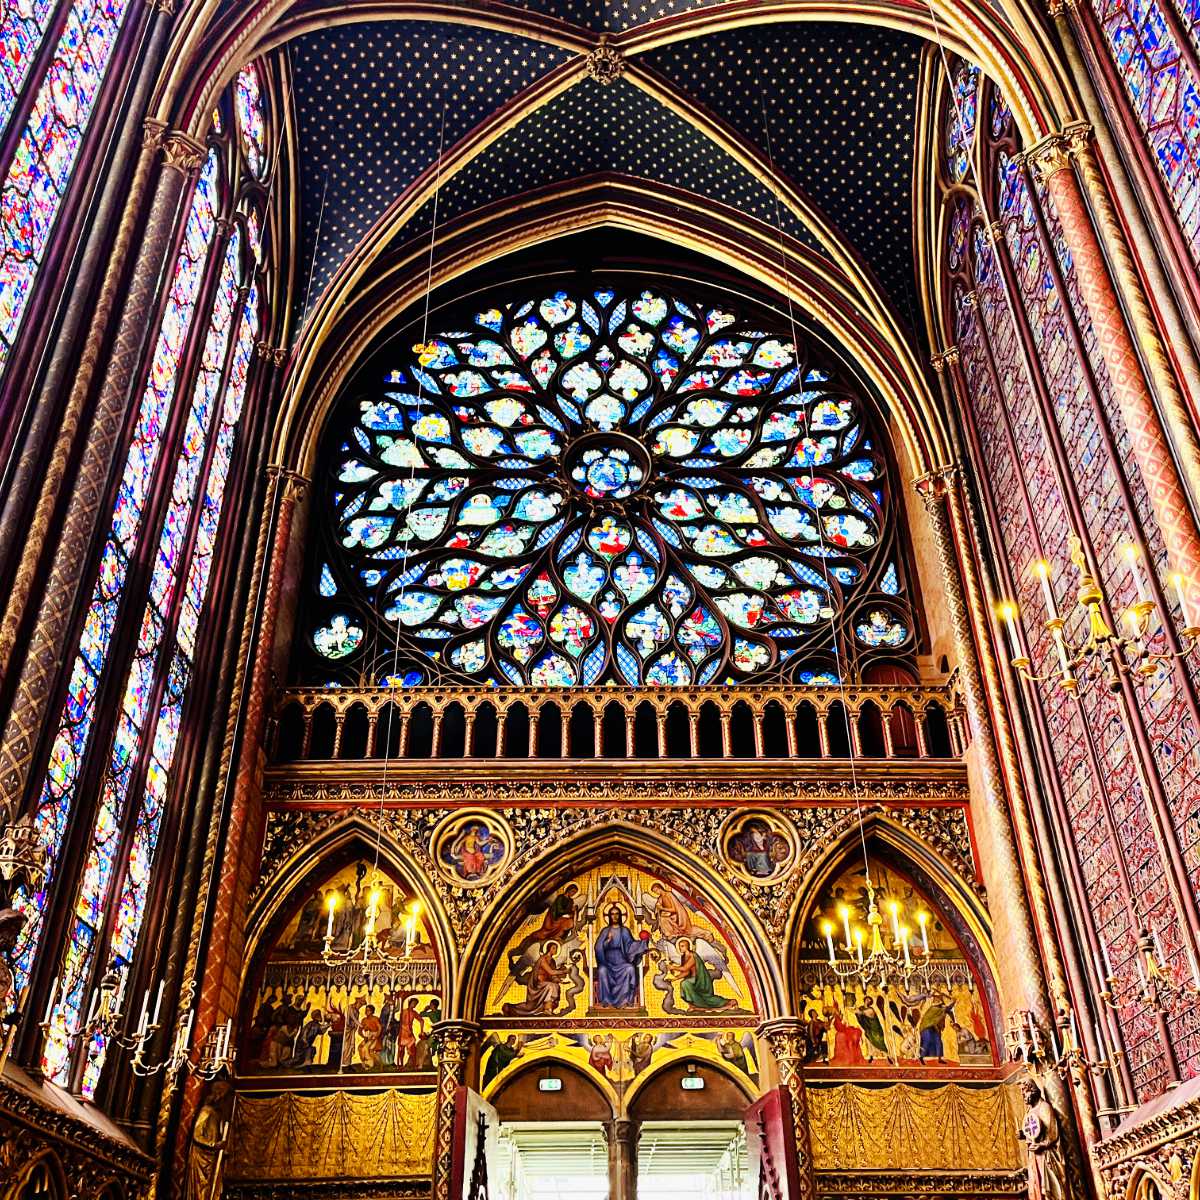 You are currently viewing 11 Churches and Cathedrals in Paris worth visiting